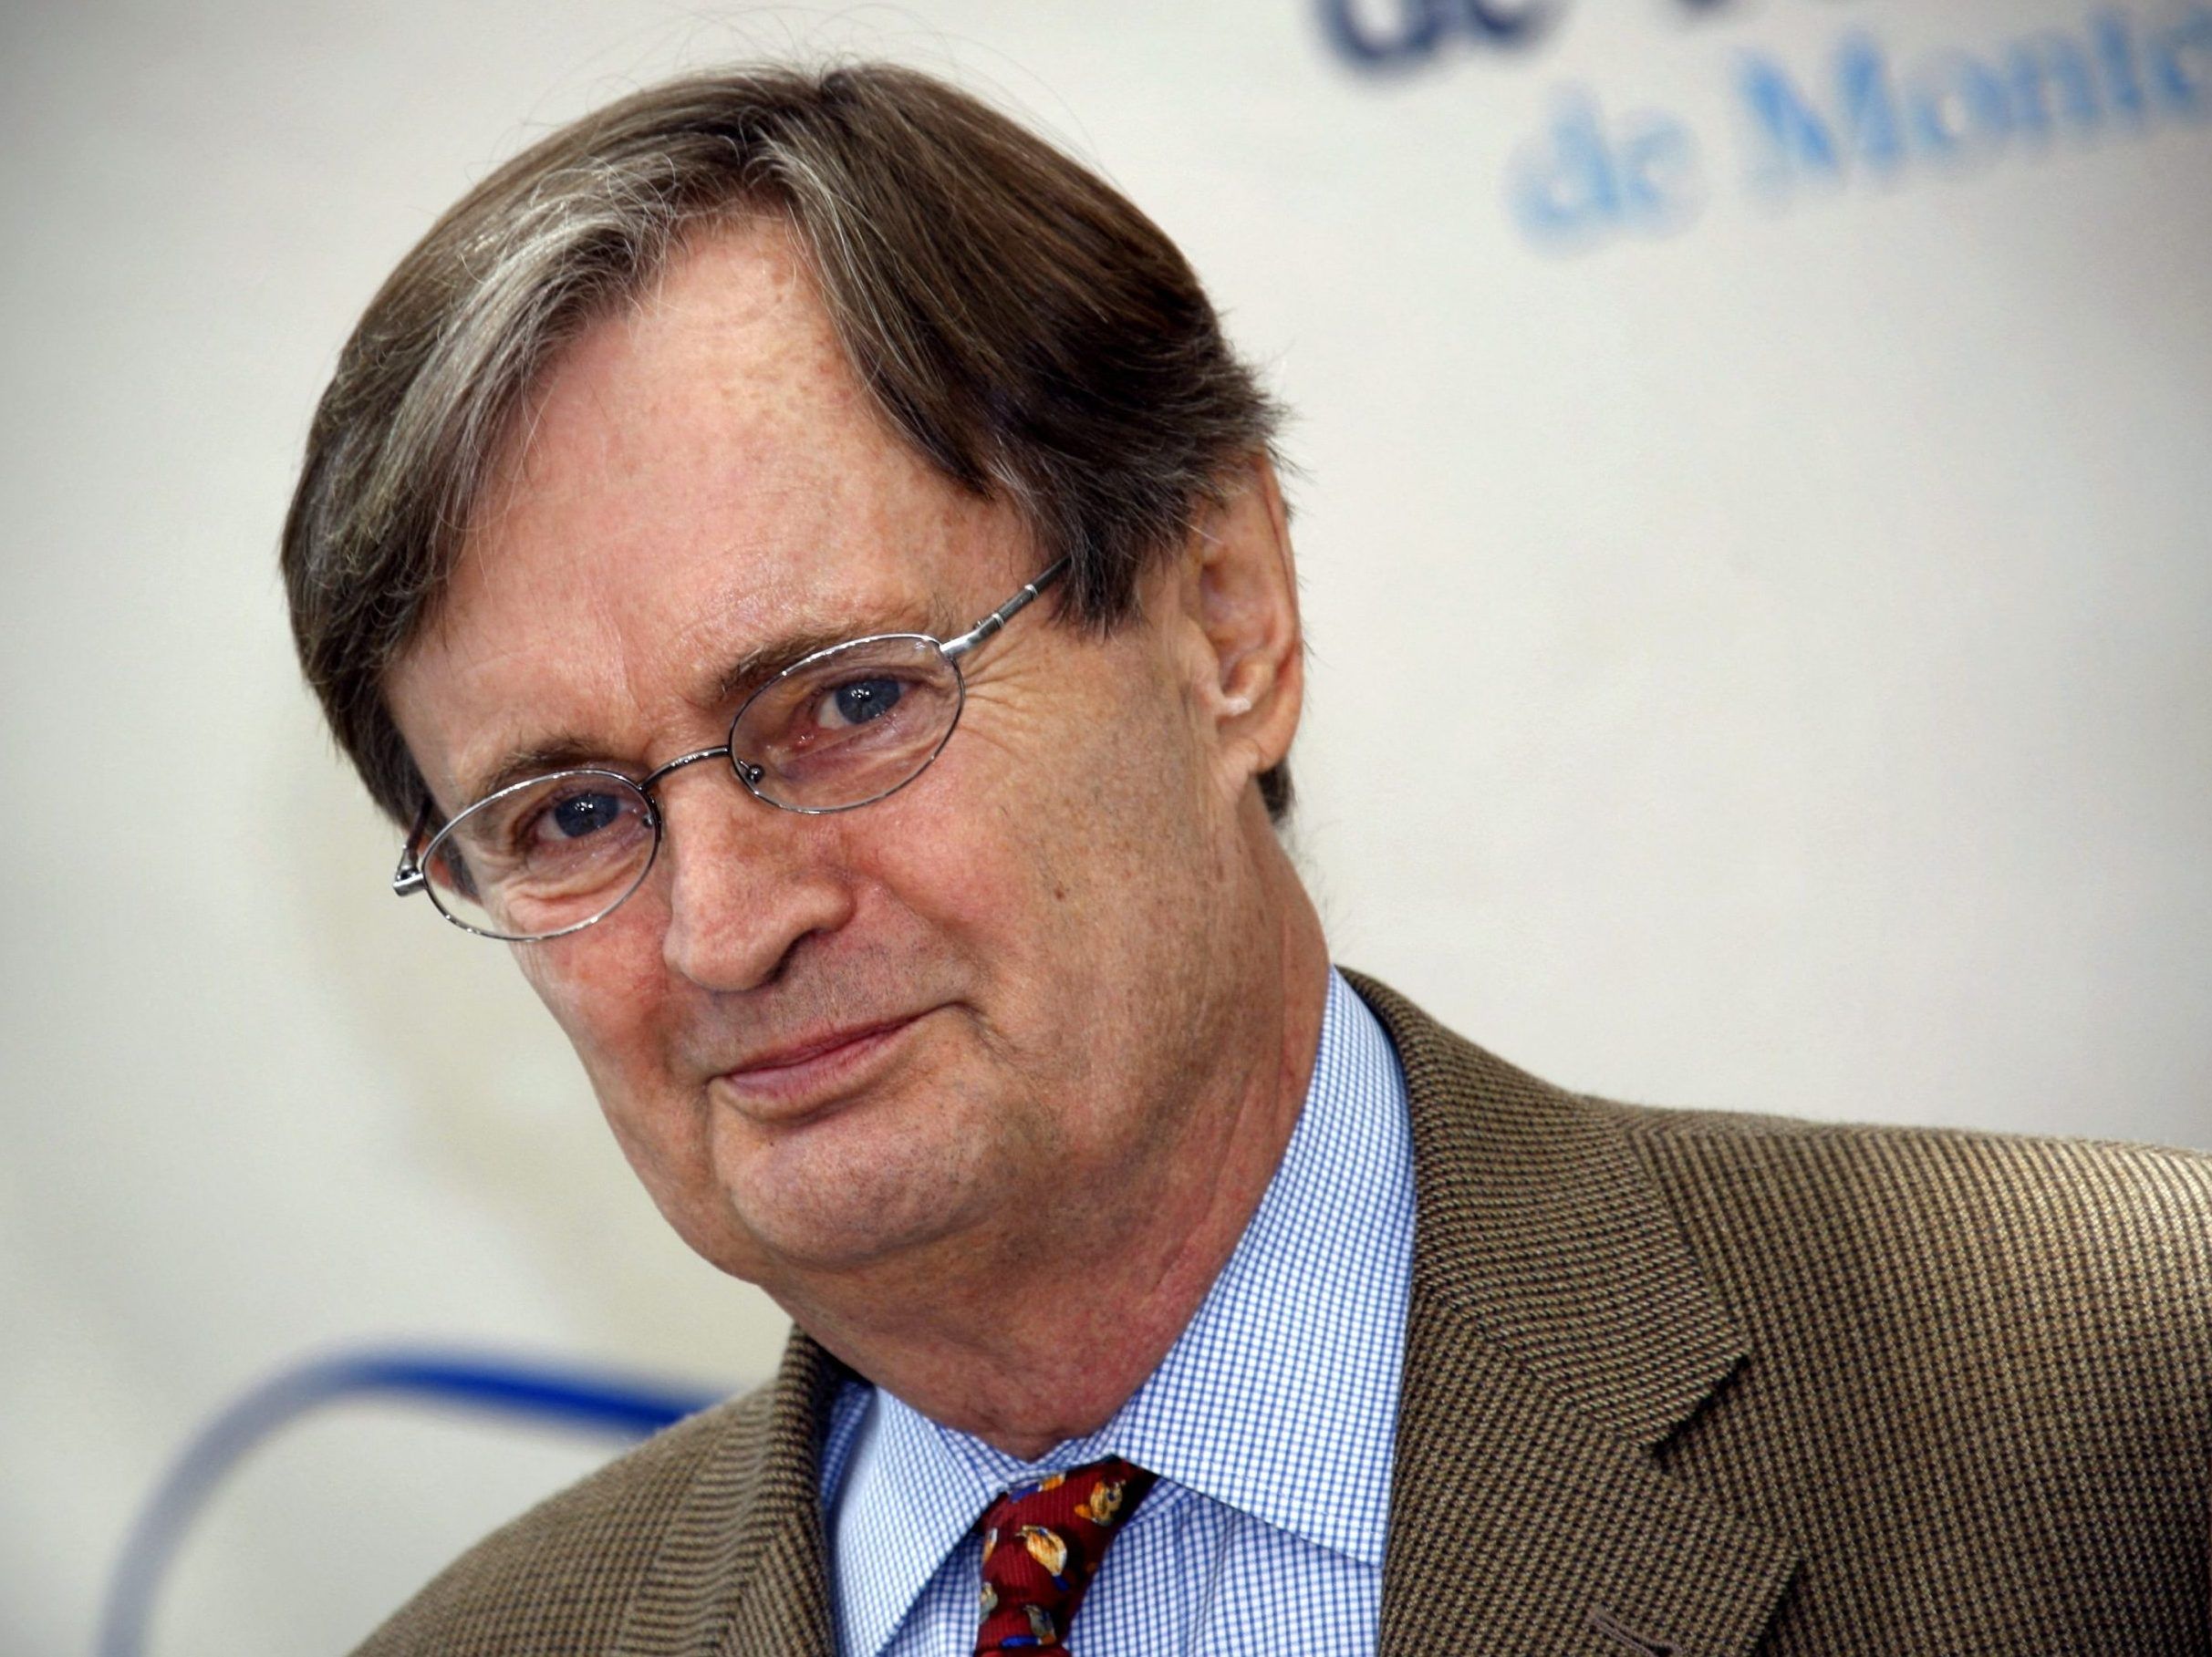 David McCallum, star of ’The Man From U.N.C.L.E.’ and ’NCIS,’ dies at 90